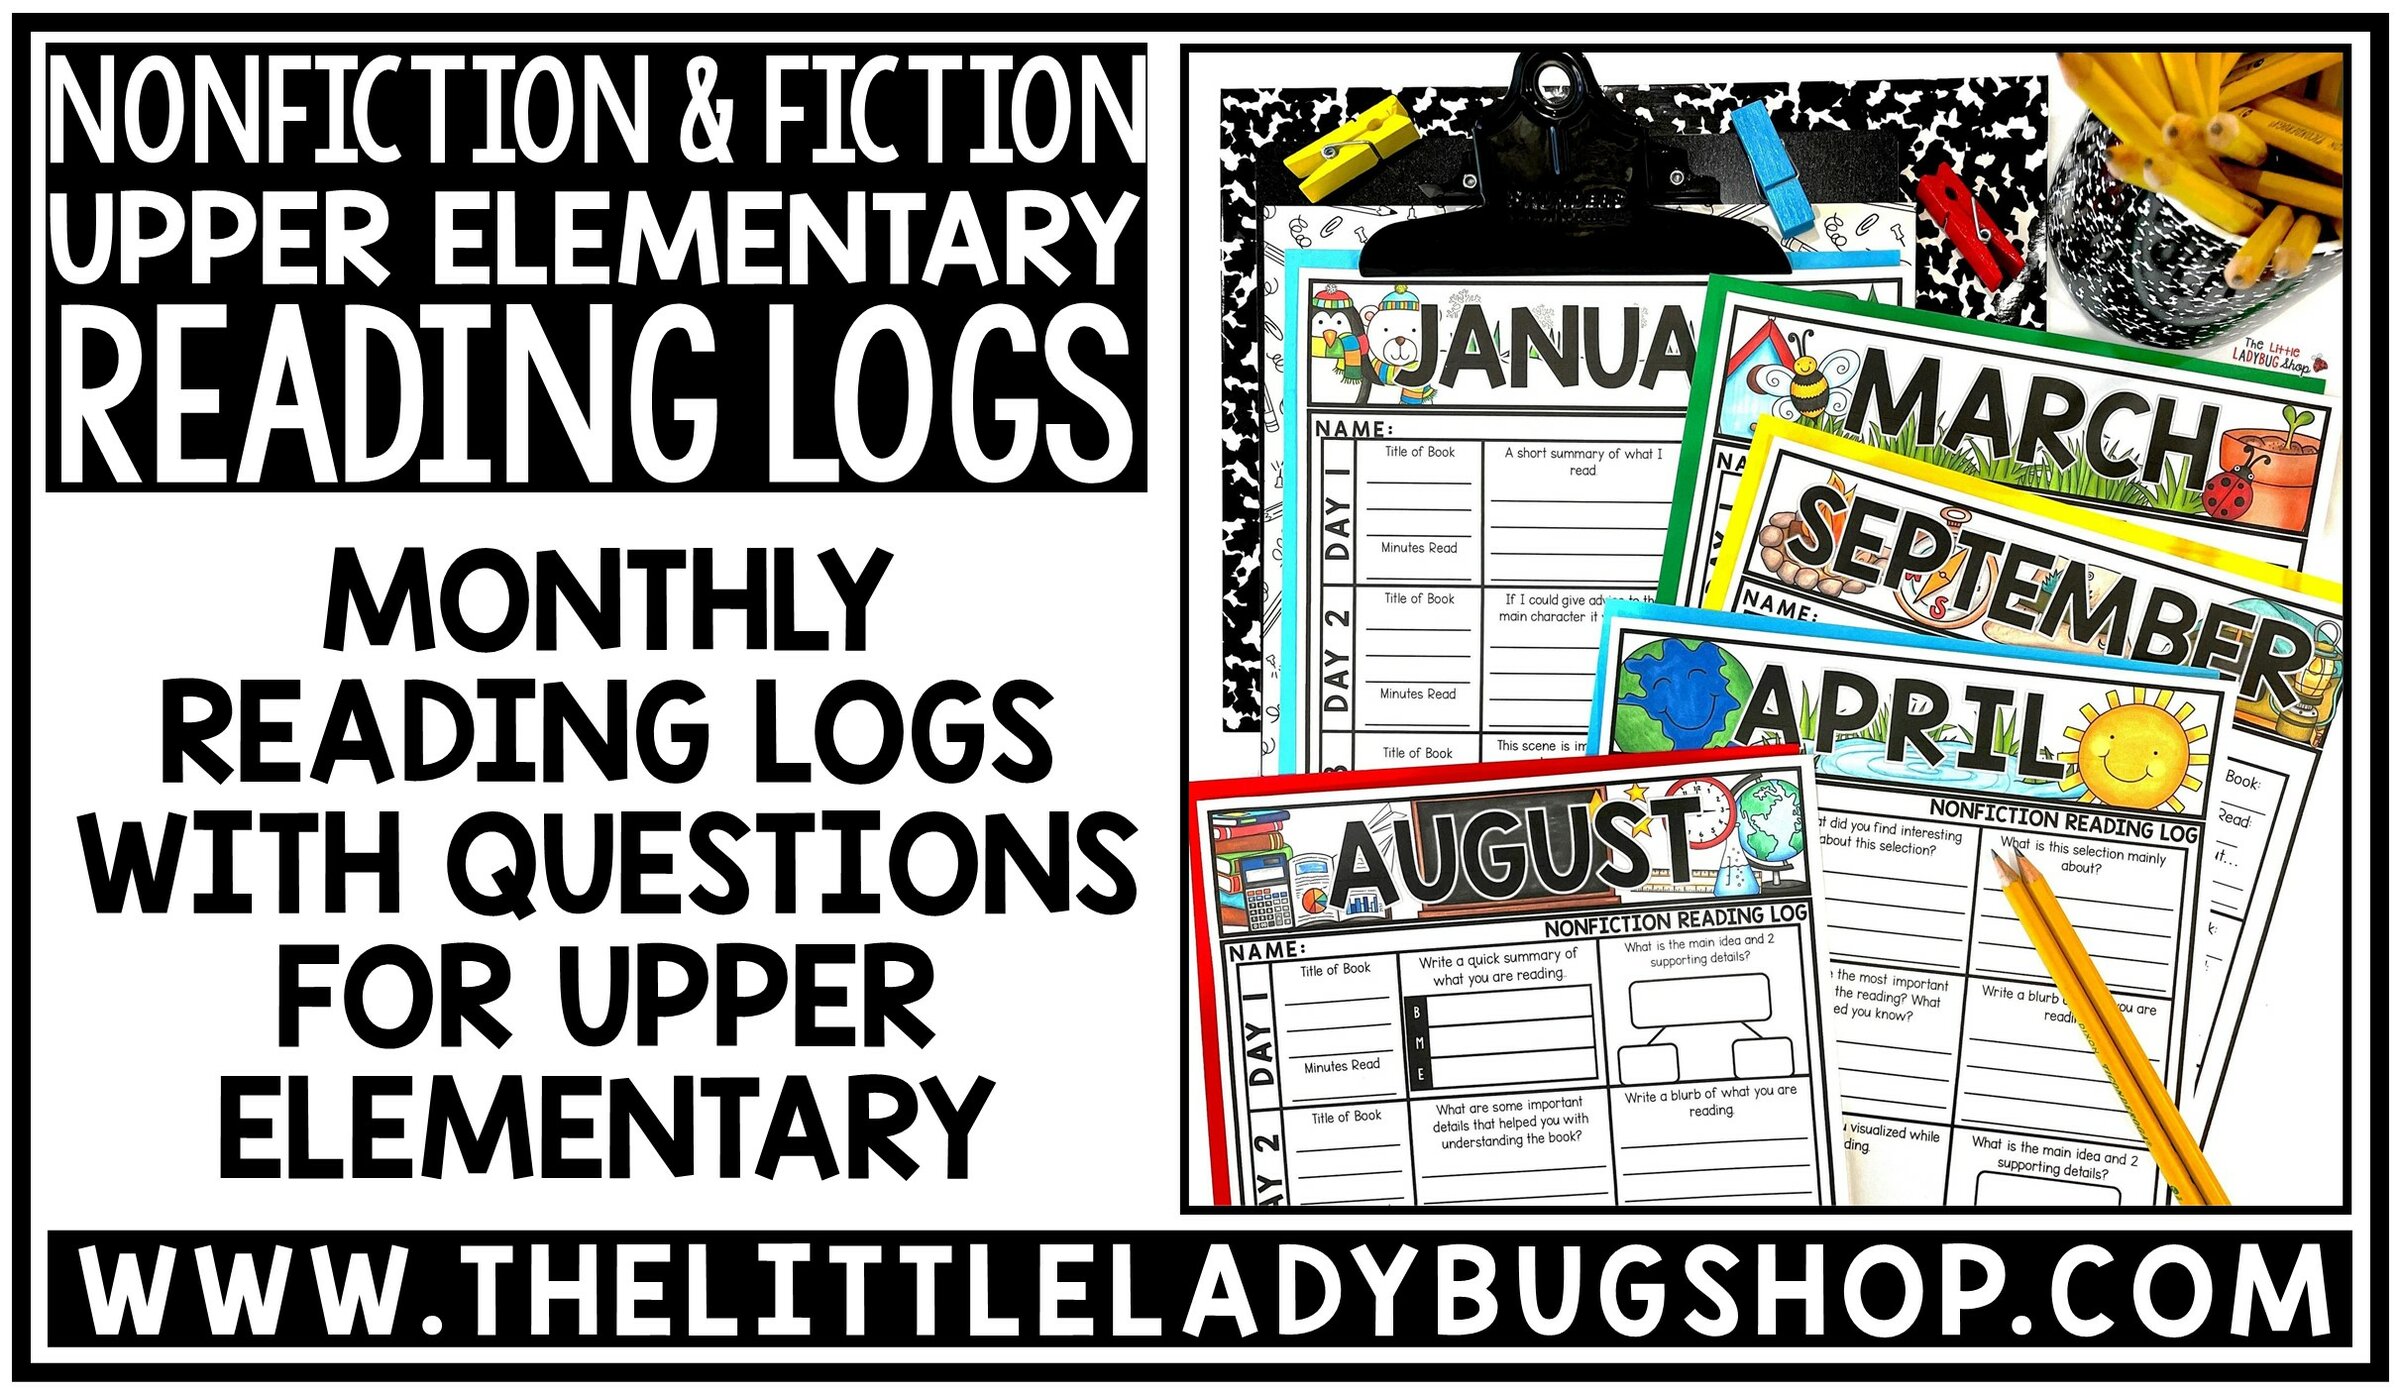 Using Fiction & Nonfiction Reading Logs in Upper Elementary